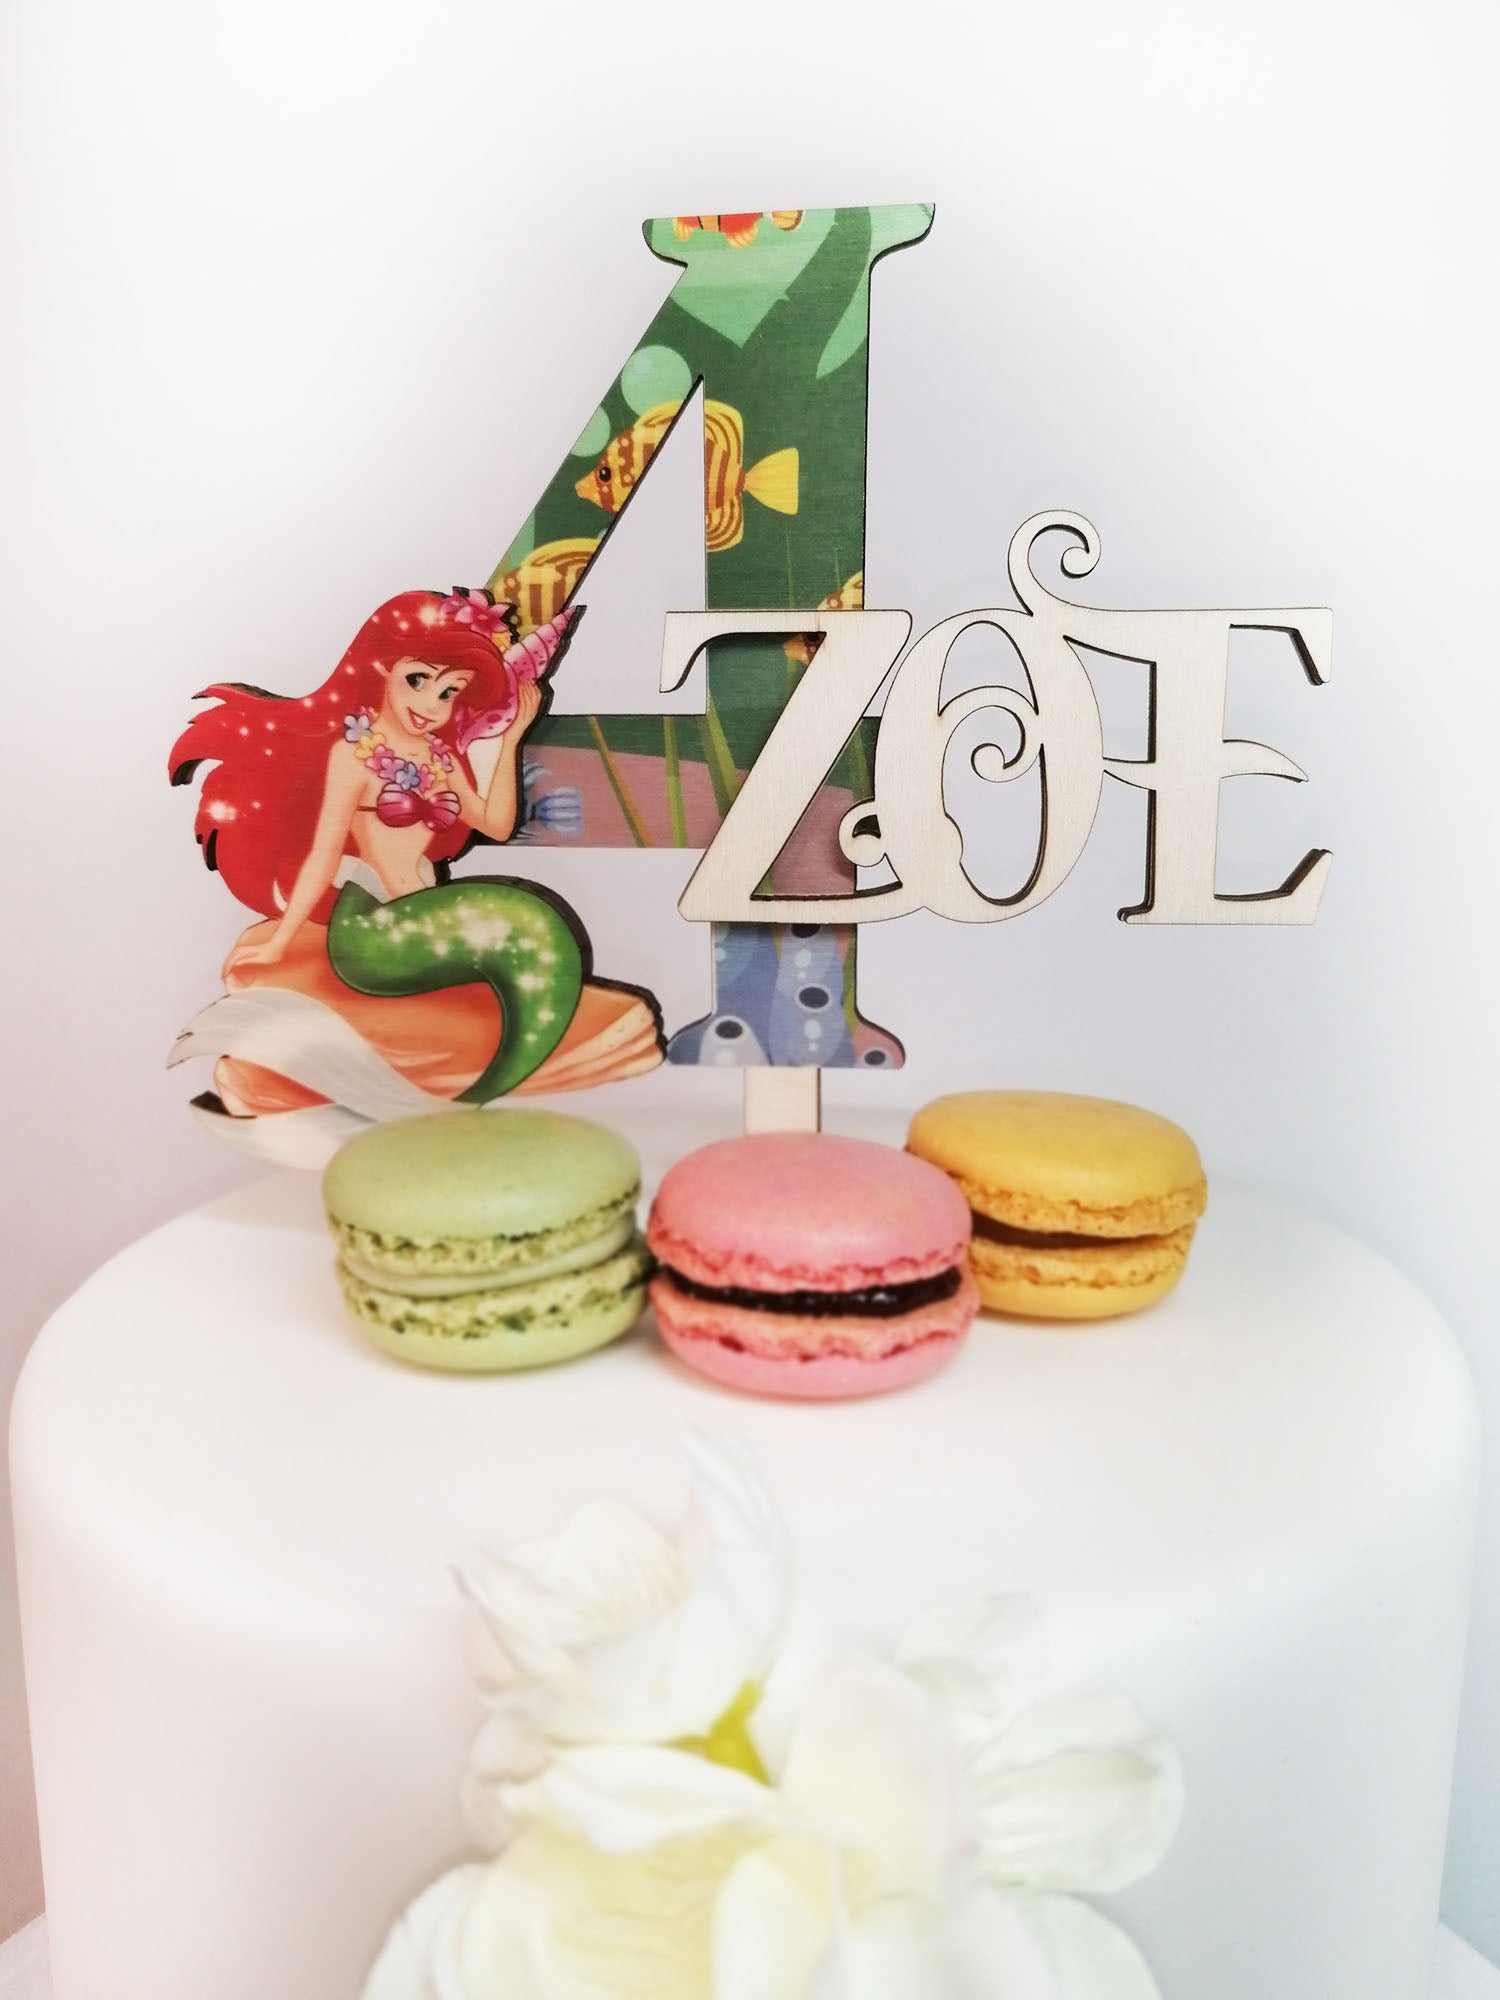 The Little Mermaid Personalised Cake Topper